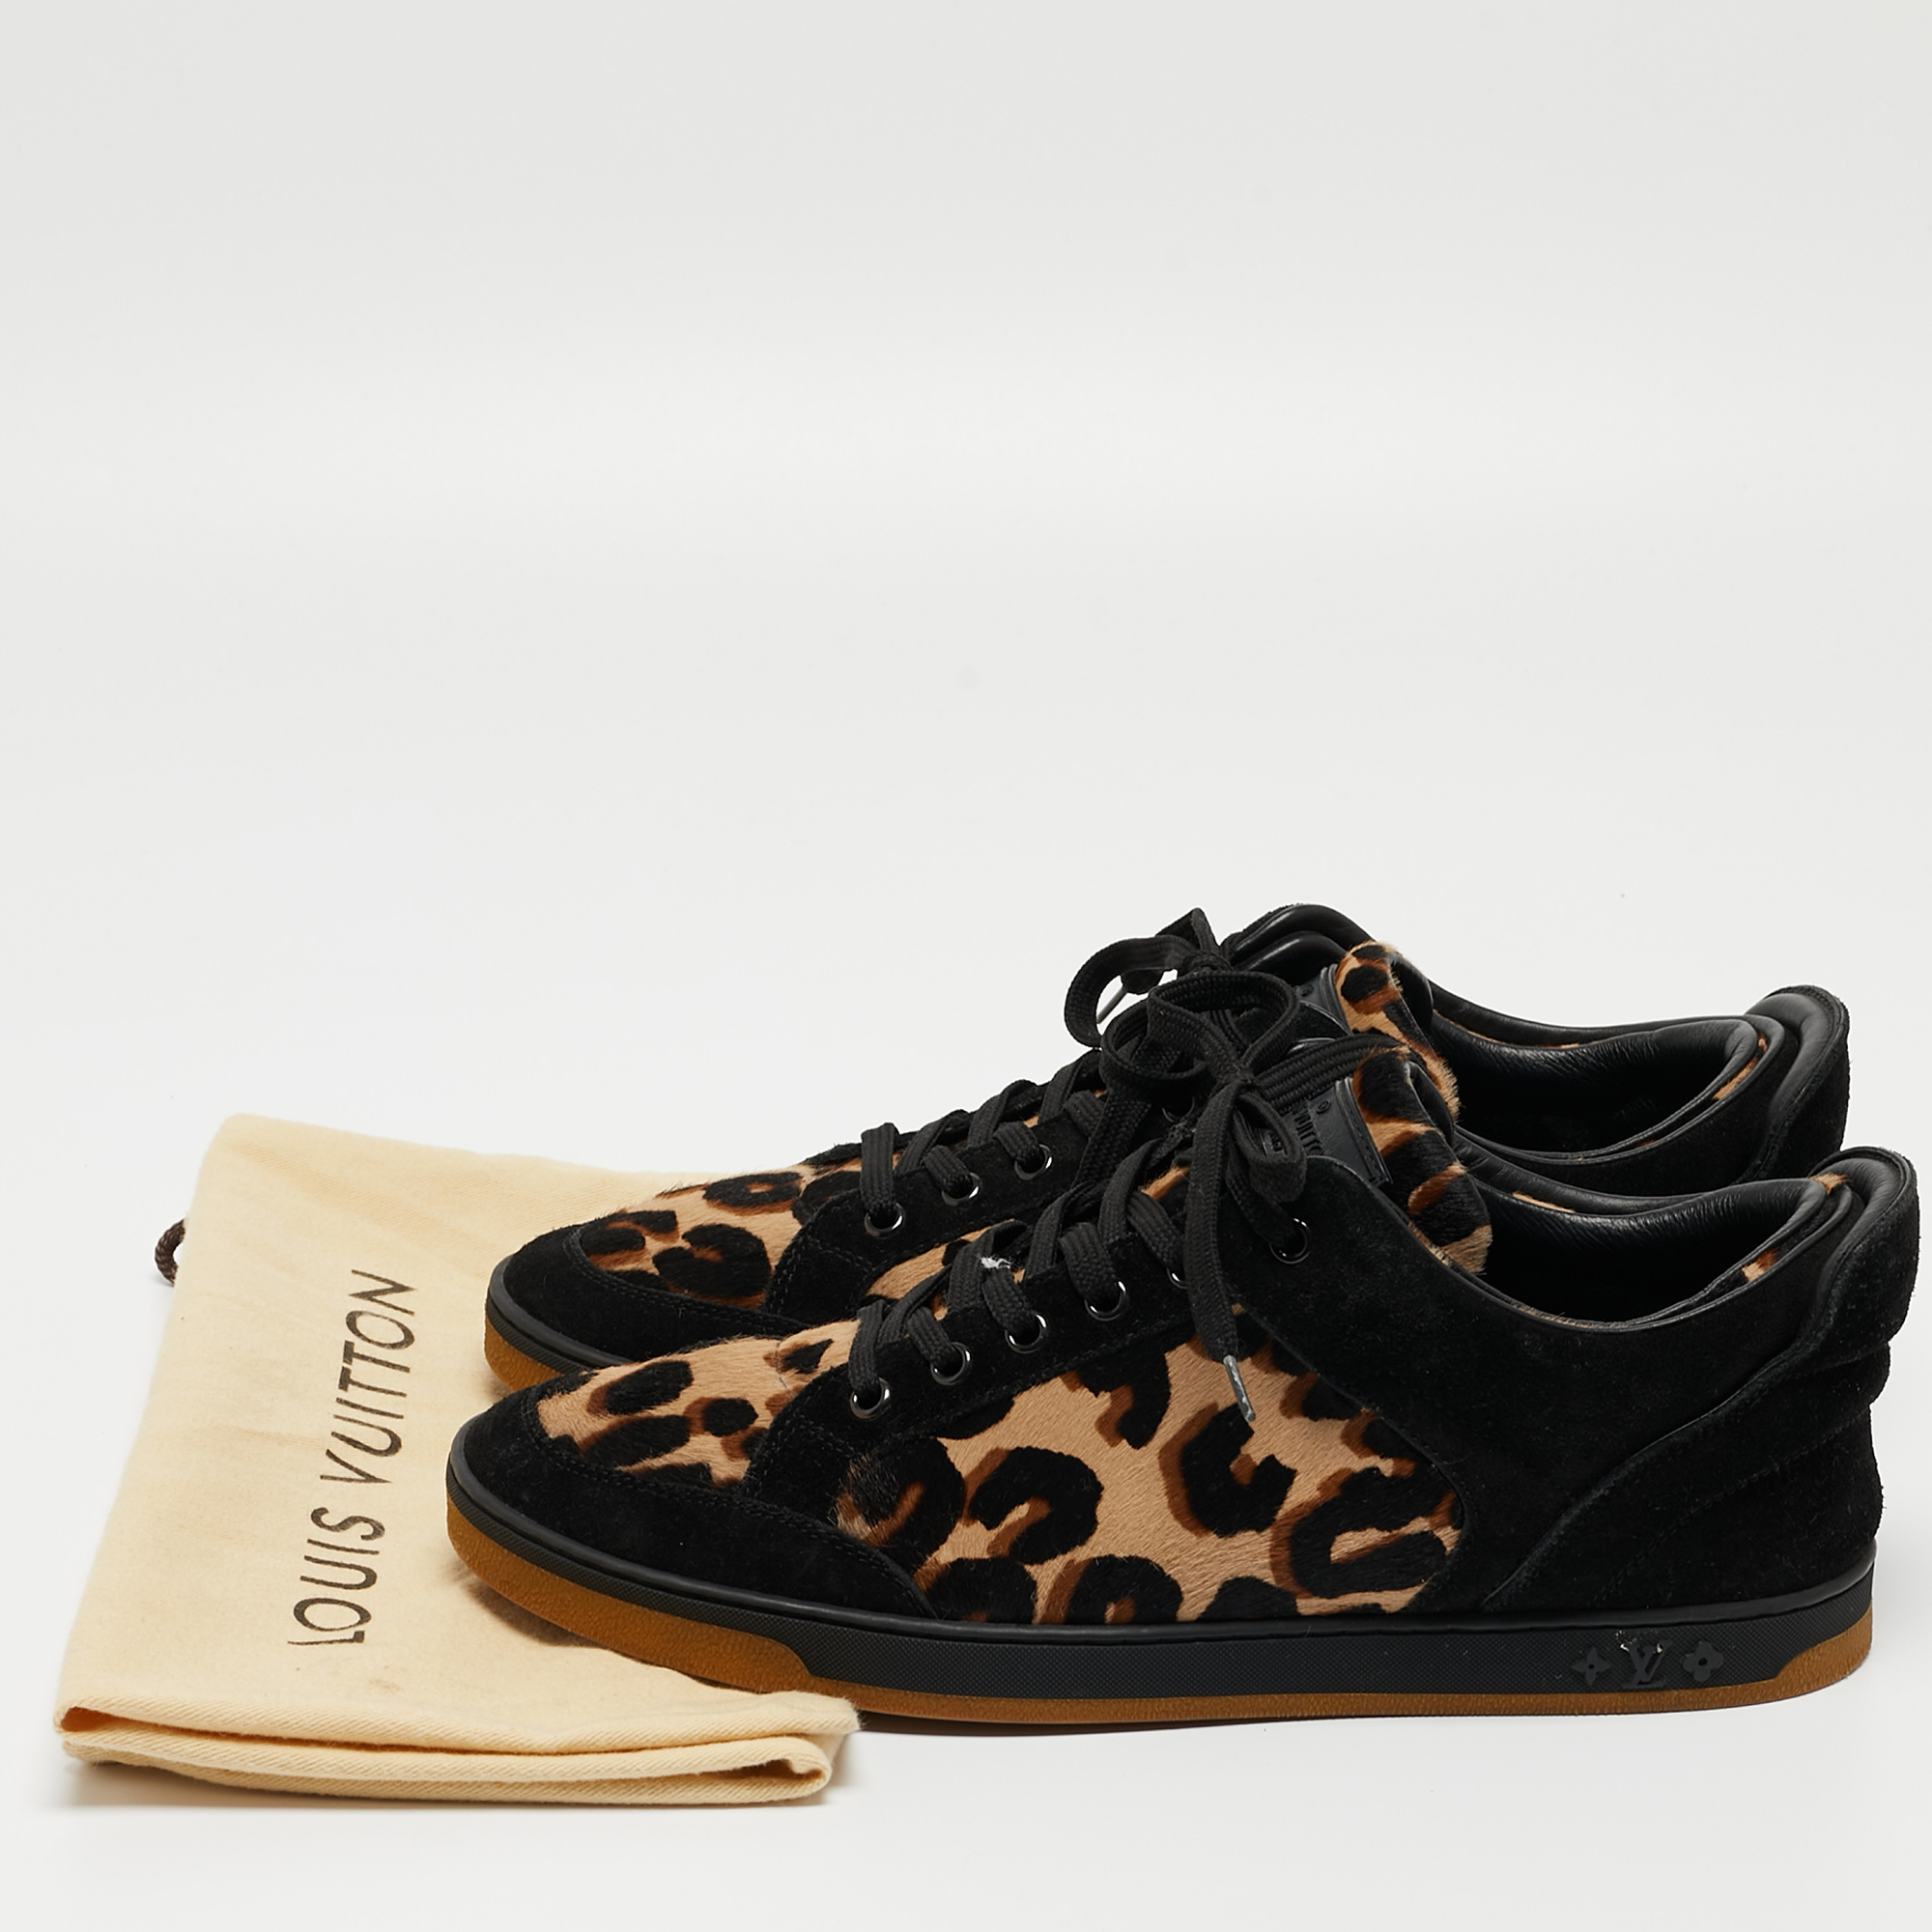 Louis Vuitton Black/Brown Calf Hair And Suede Low Top Sneakers Size 38.5